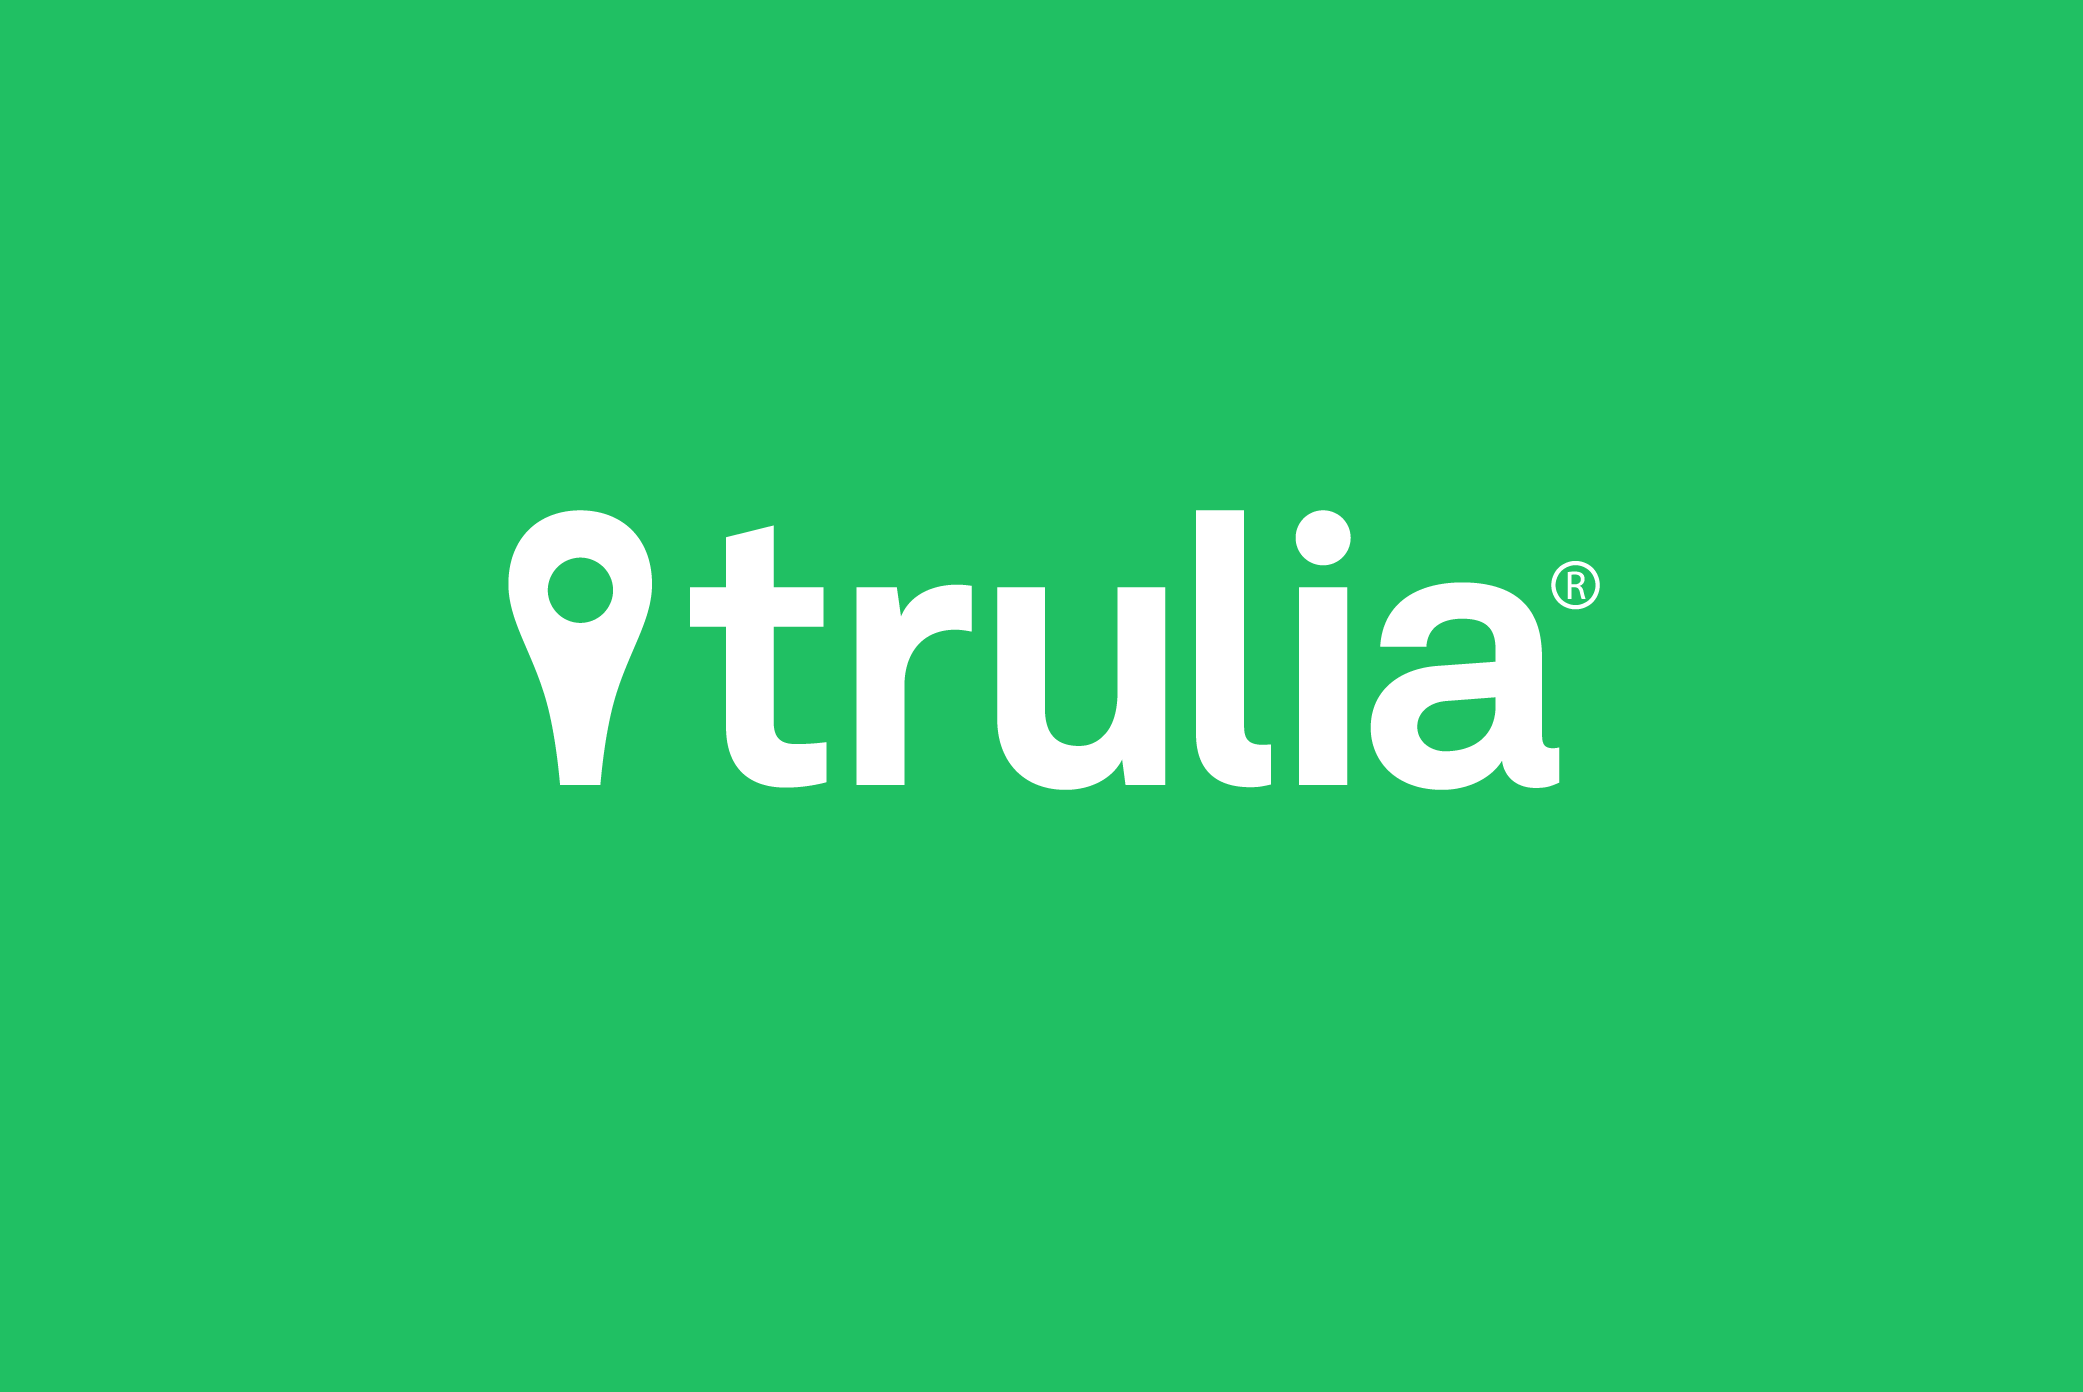 Trulia.com Logo - Trulia Out and About in November's Blog